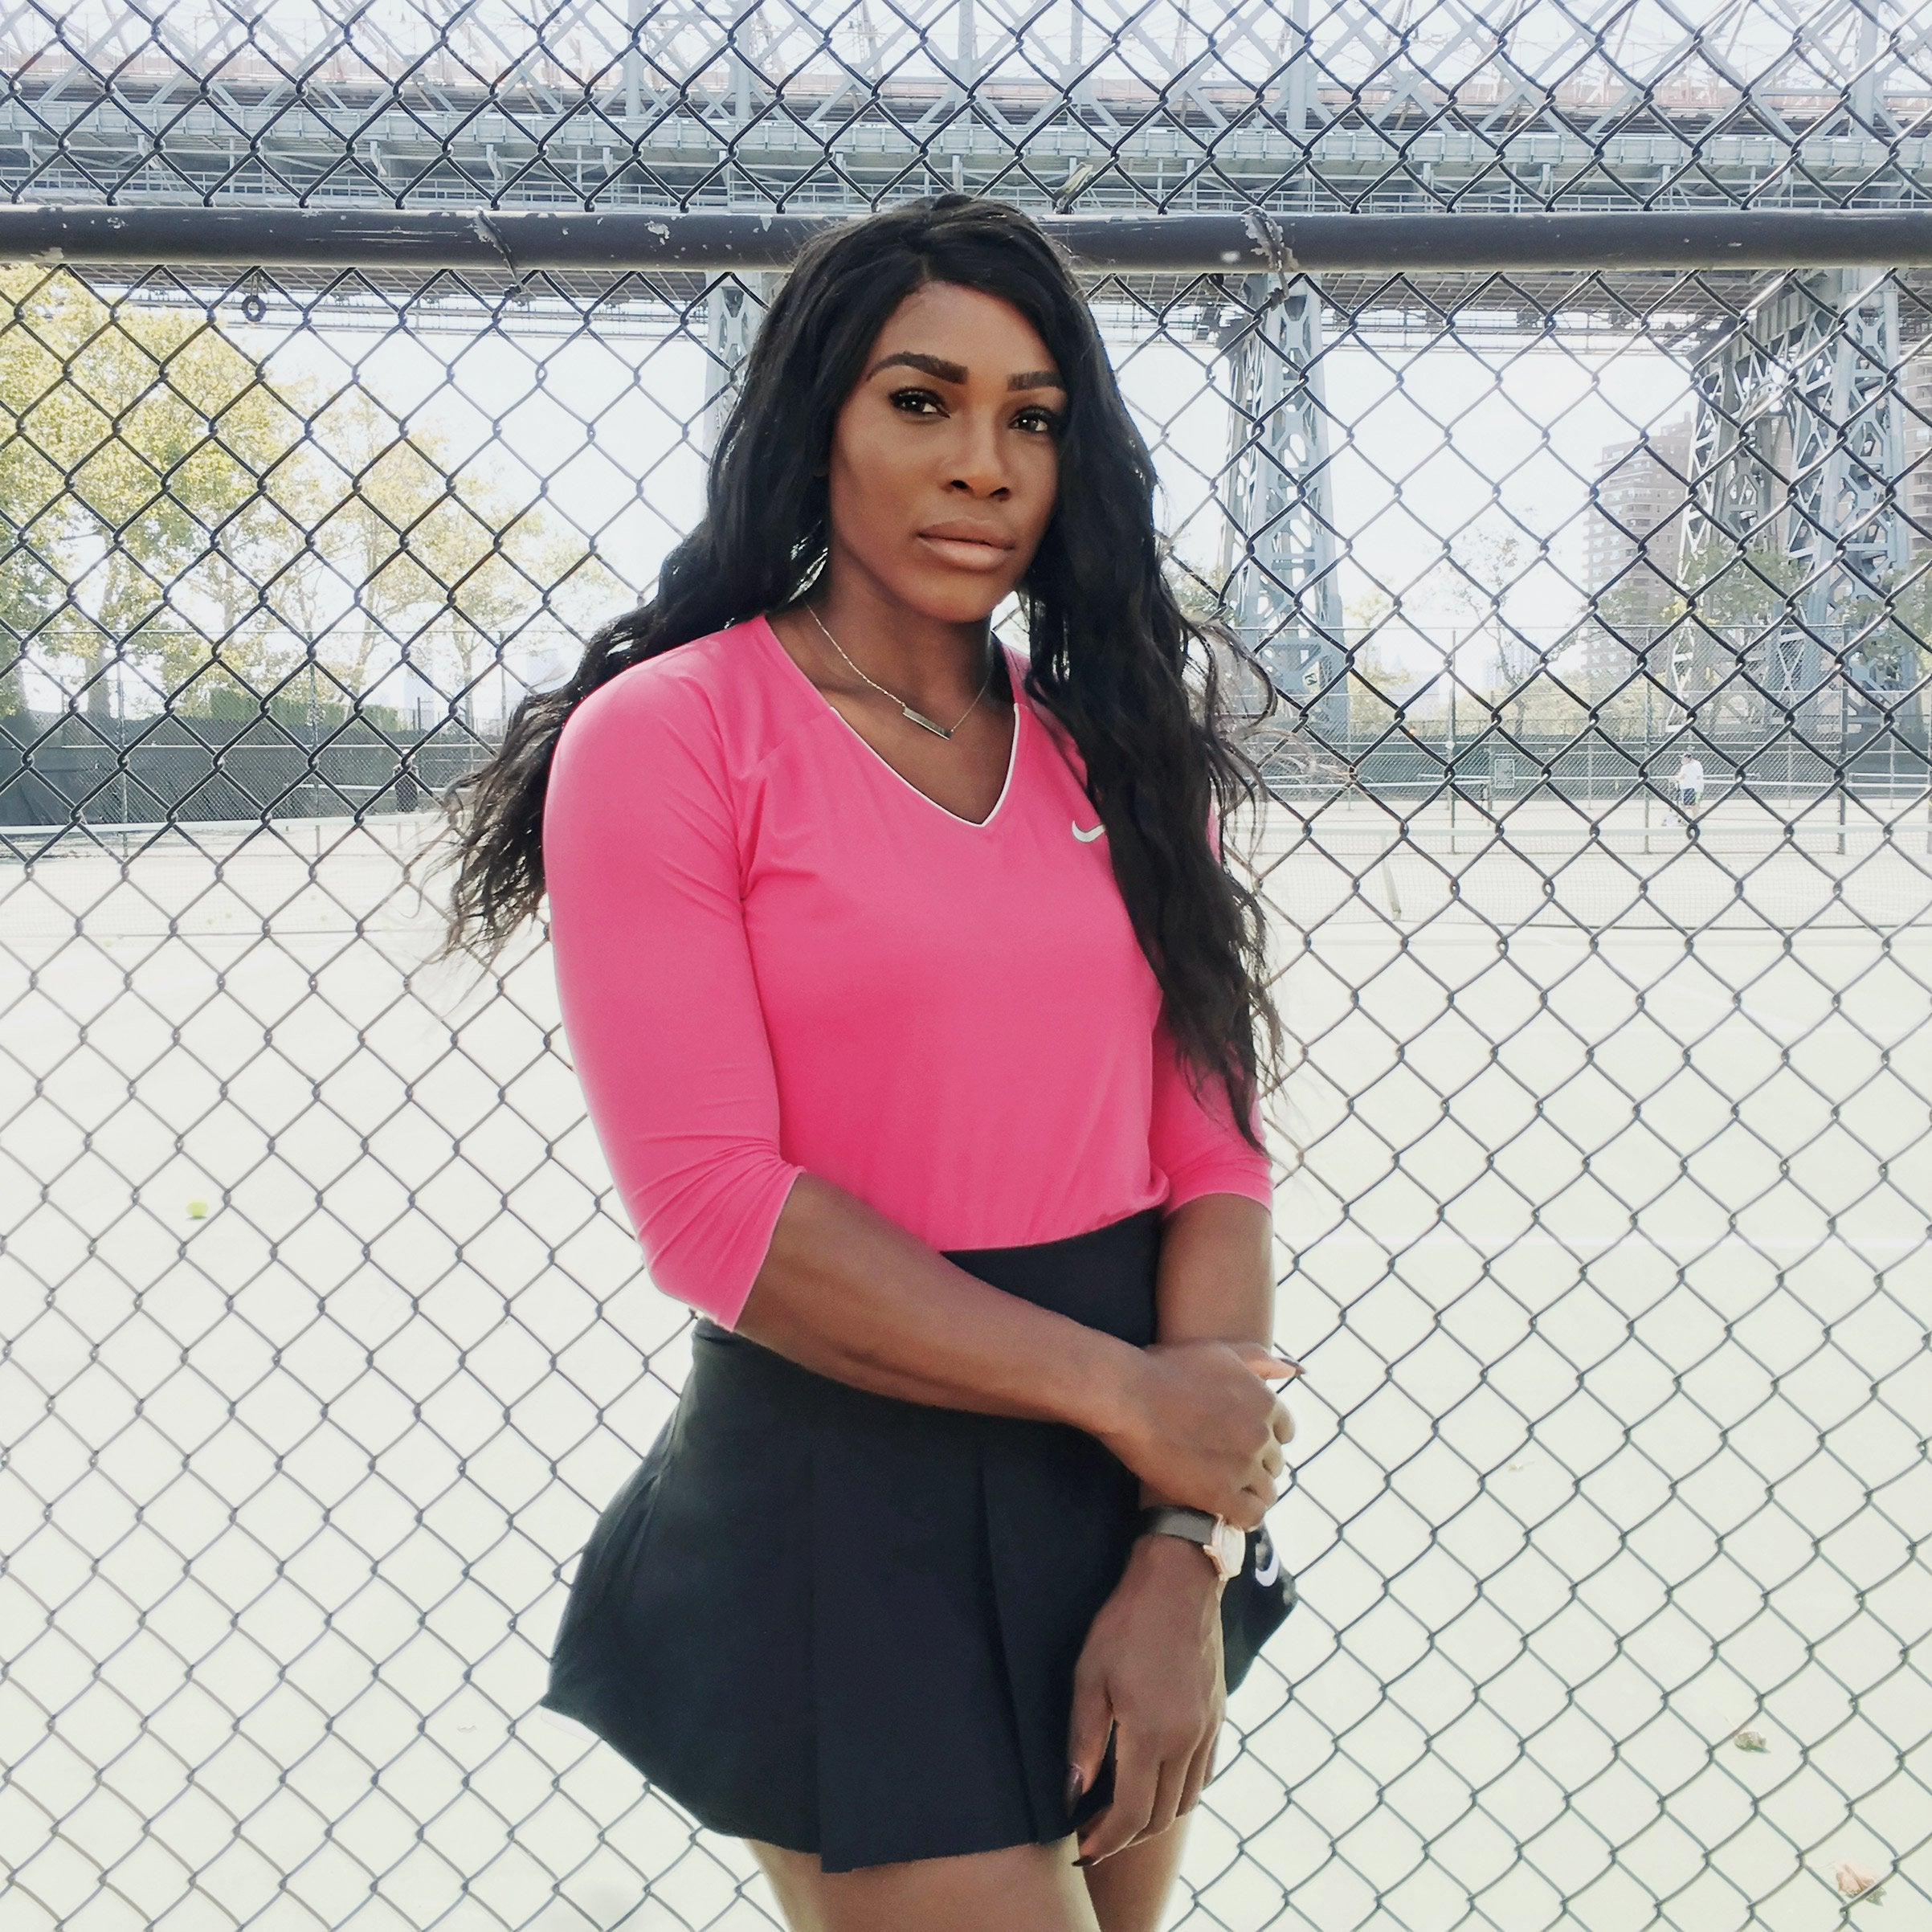 Serena Williams On Dealing With The Haters
